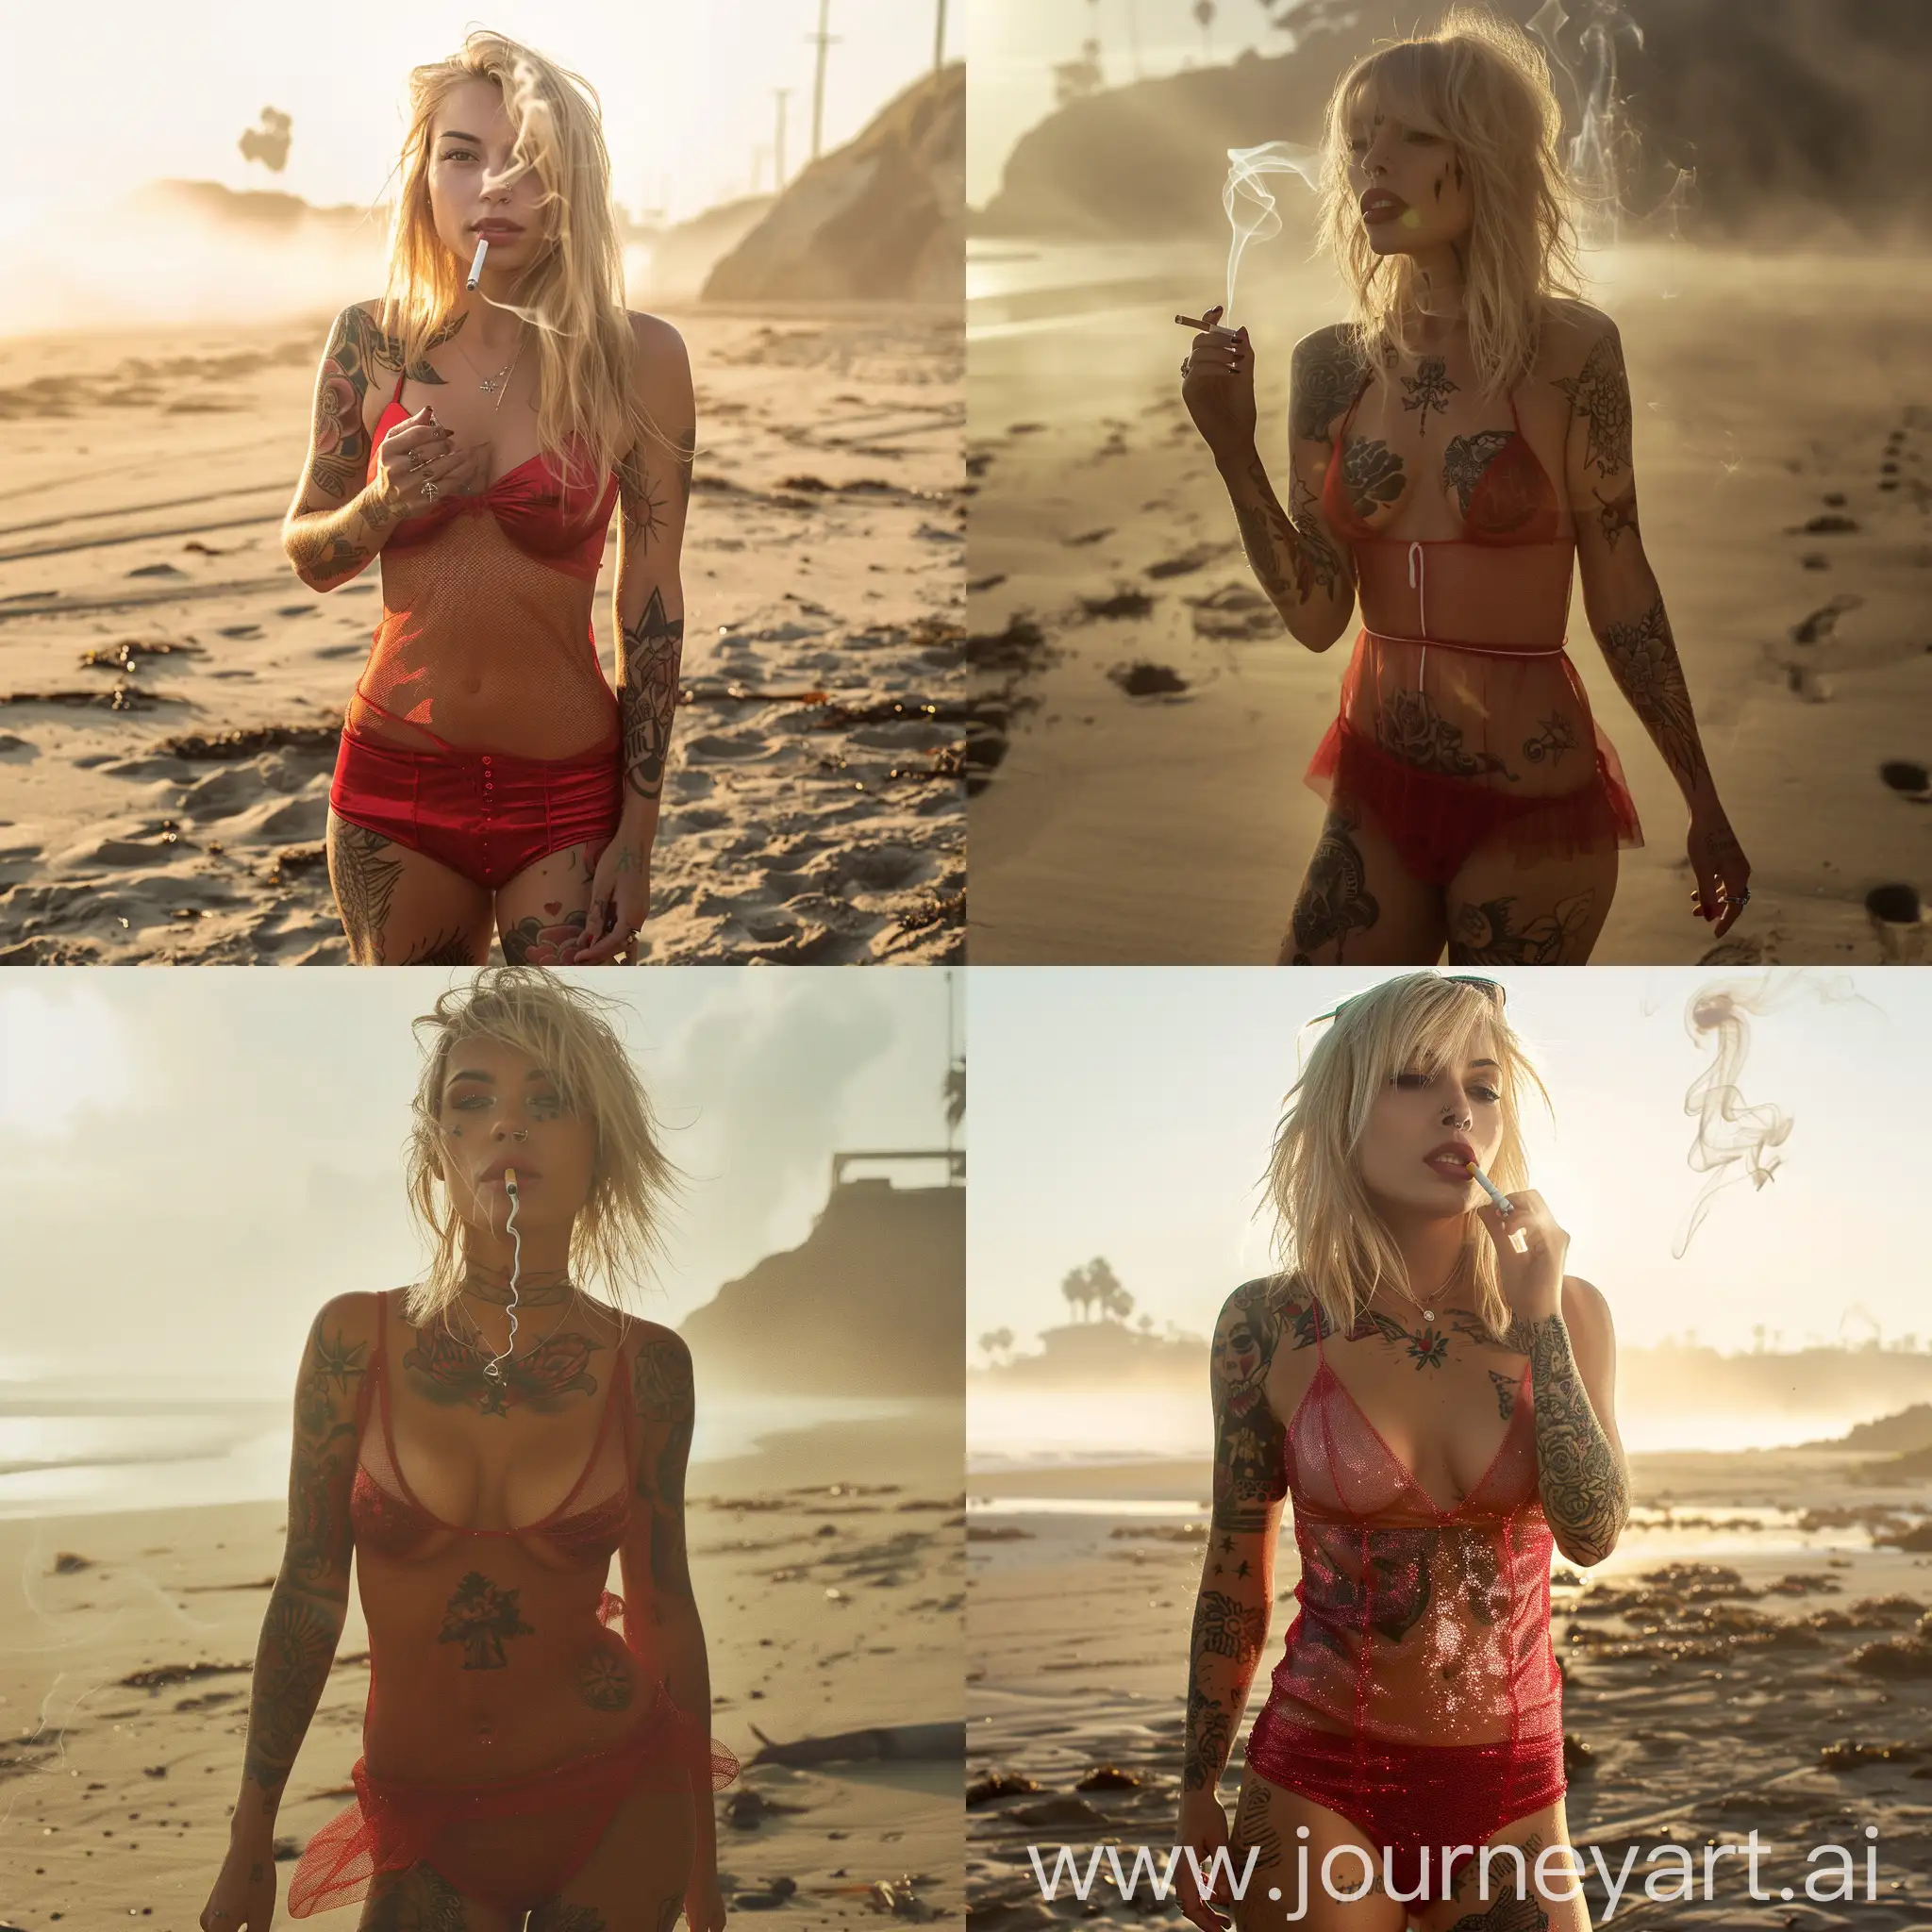 hyperrealism, portrait, sun backlit, foggy, blonde woman, tattooed, pinup model, standing on beach, trans-parent-red-dress, cigarette dangling from mouth, drifting smoke